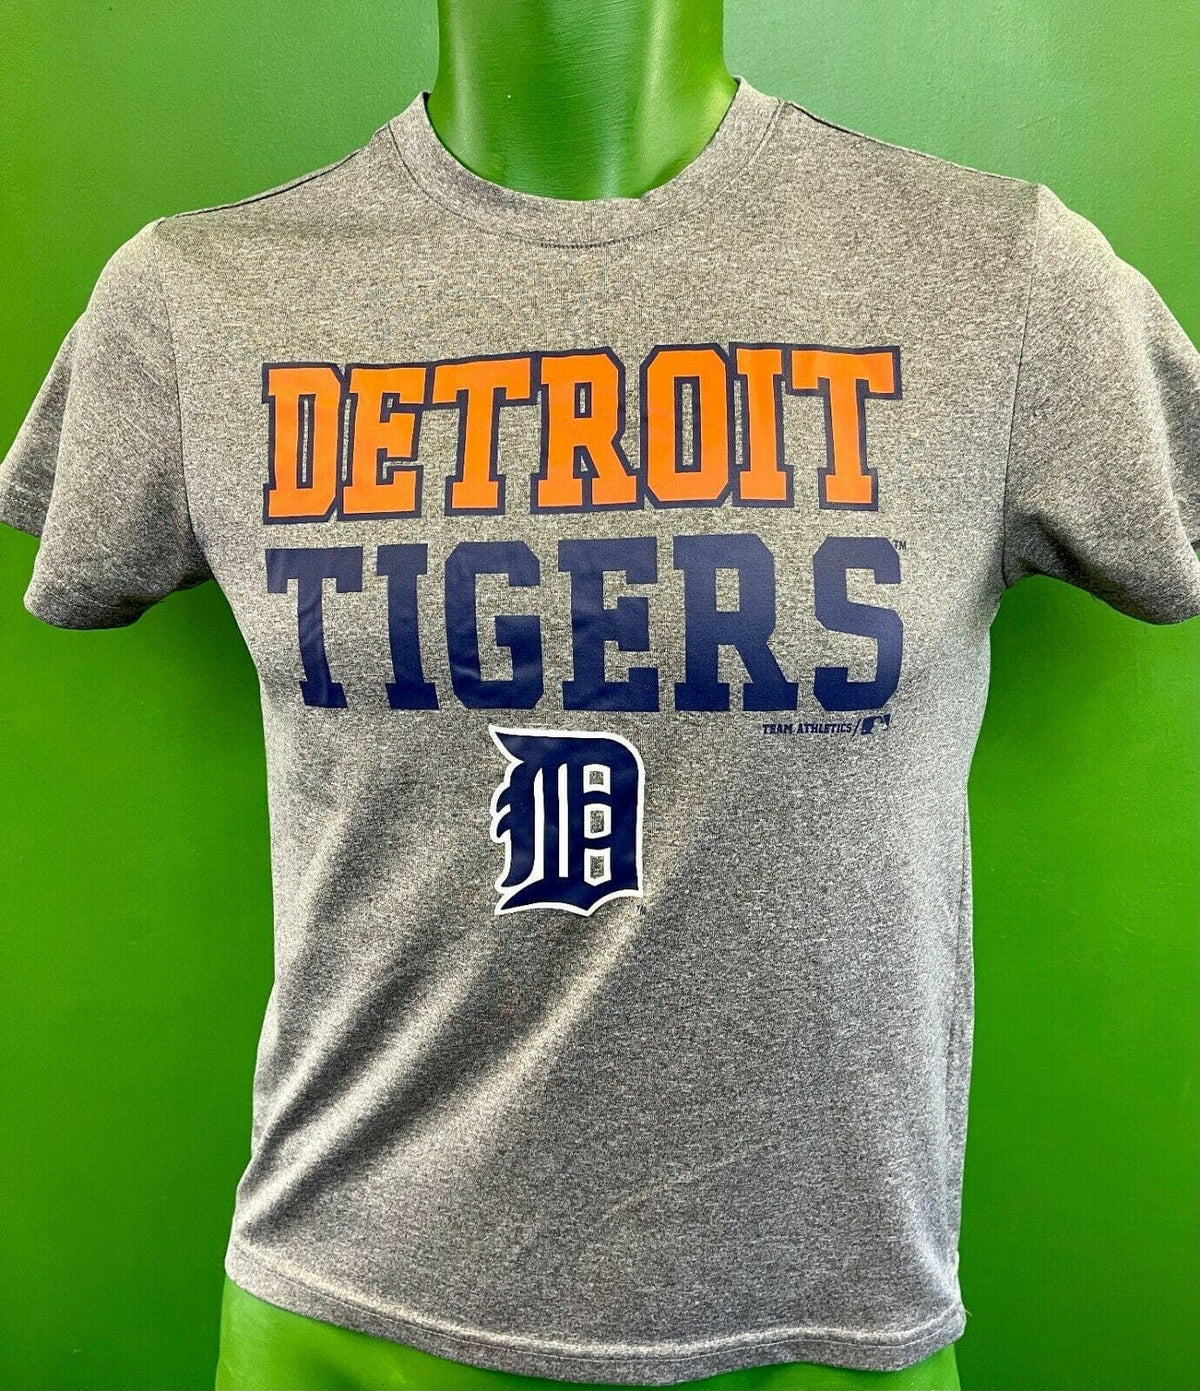 MLB Detroit Tigers Grey Wicking T-Shirt Youth Small 6-8